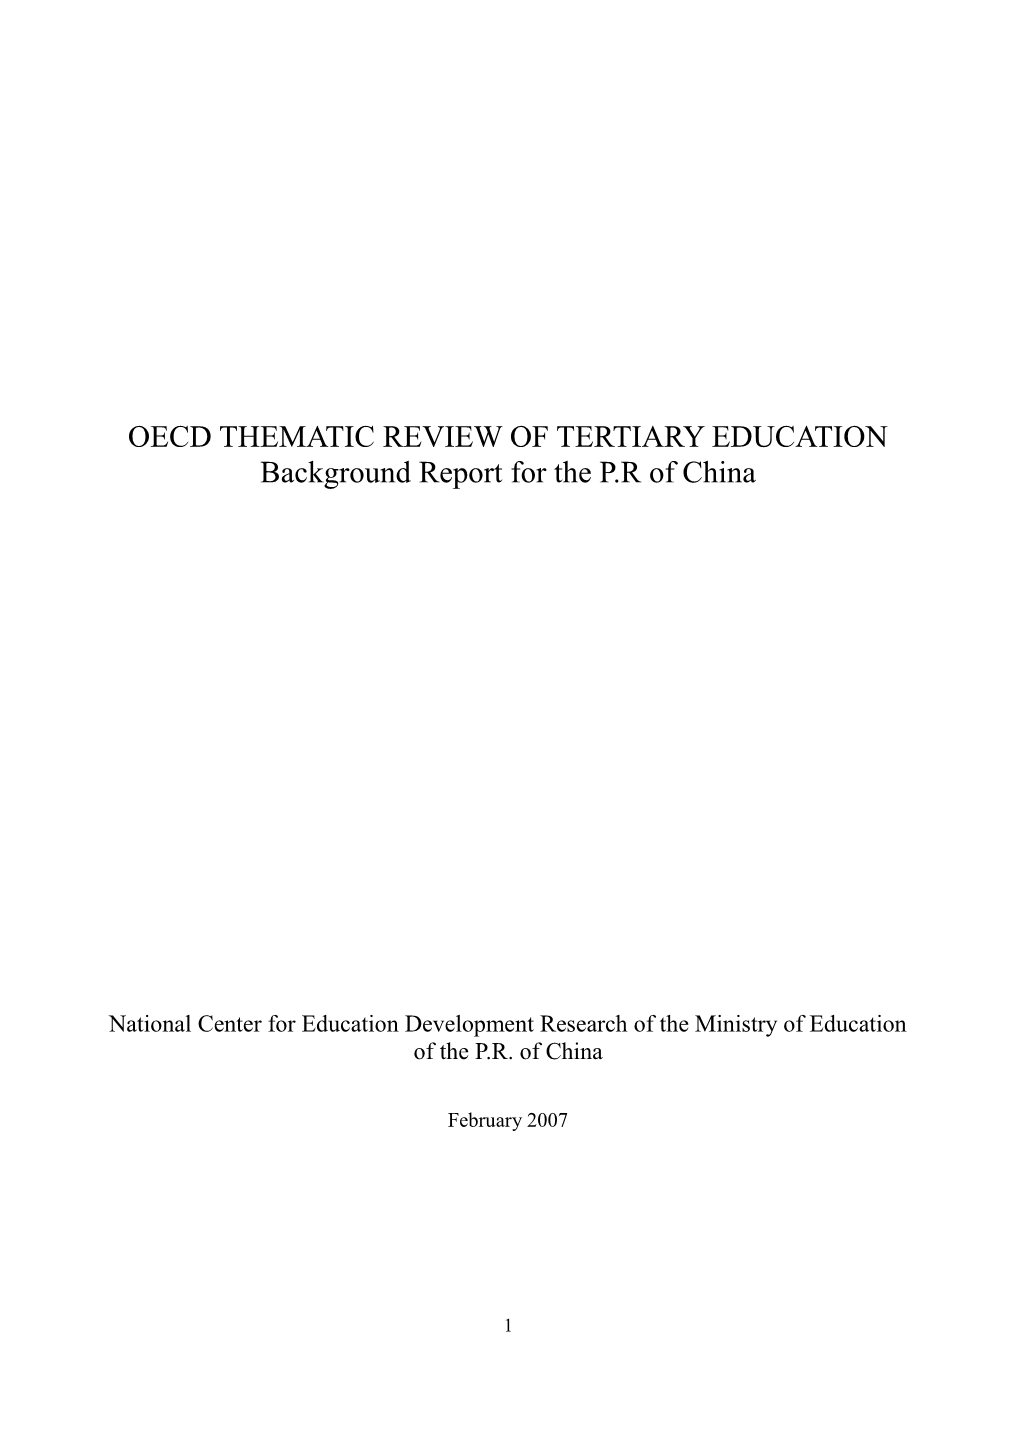 OECD THEMATIC REVIEW of TERTIARY EDUCATION Background Report for the P.R of China